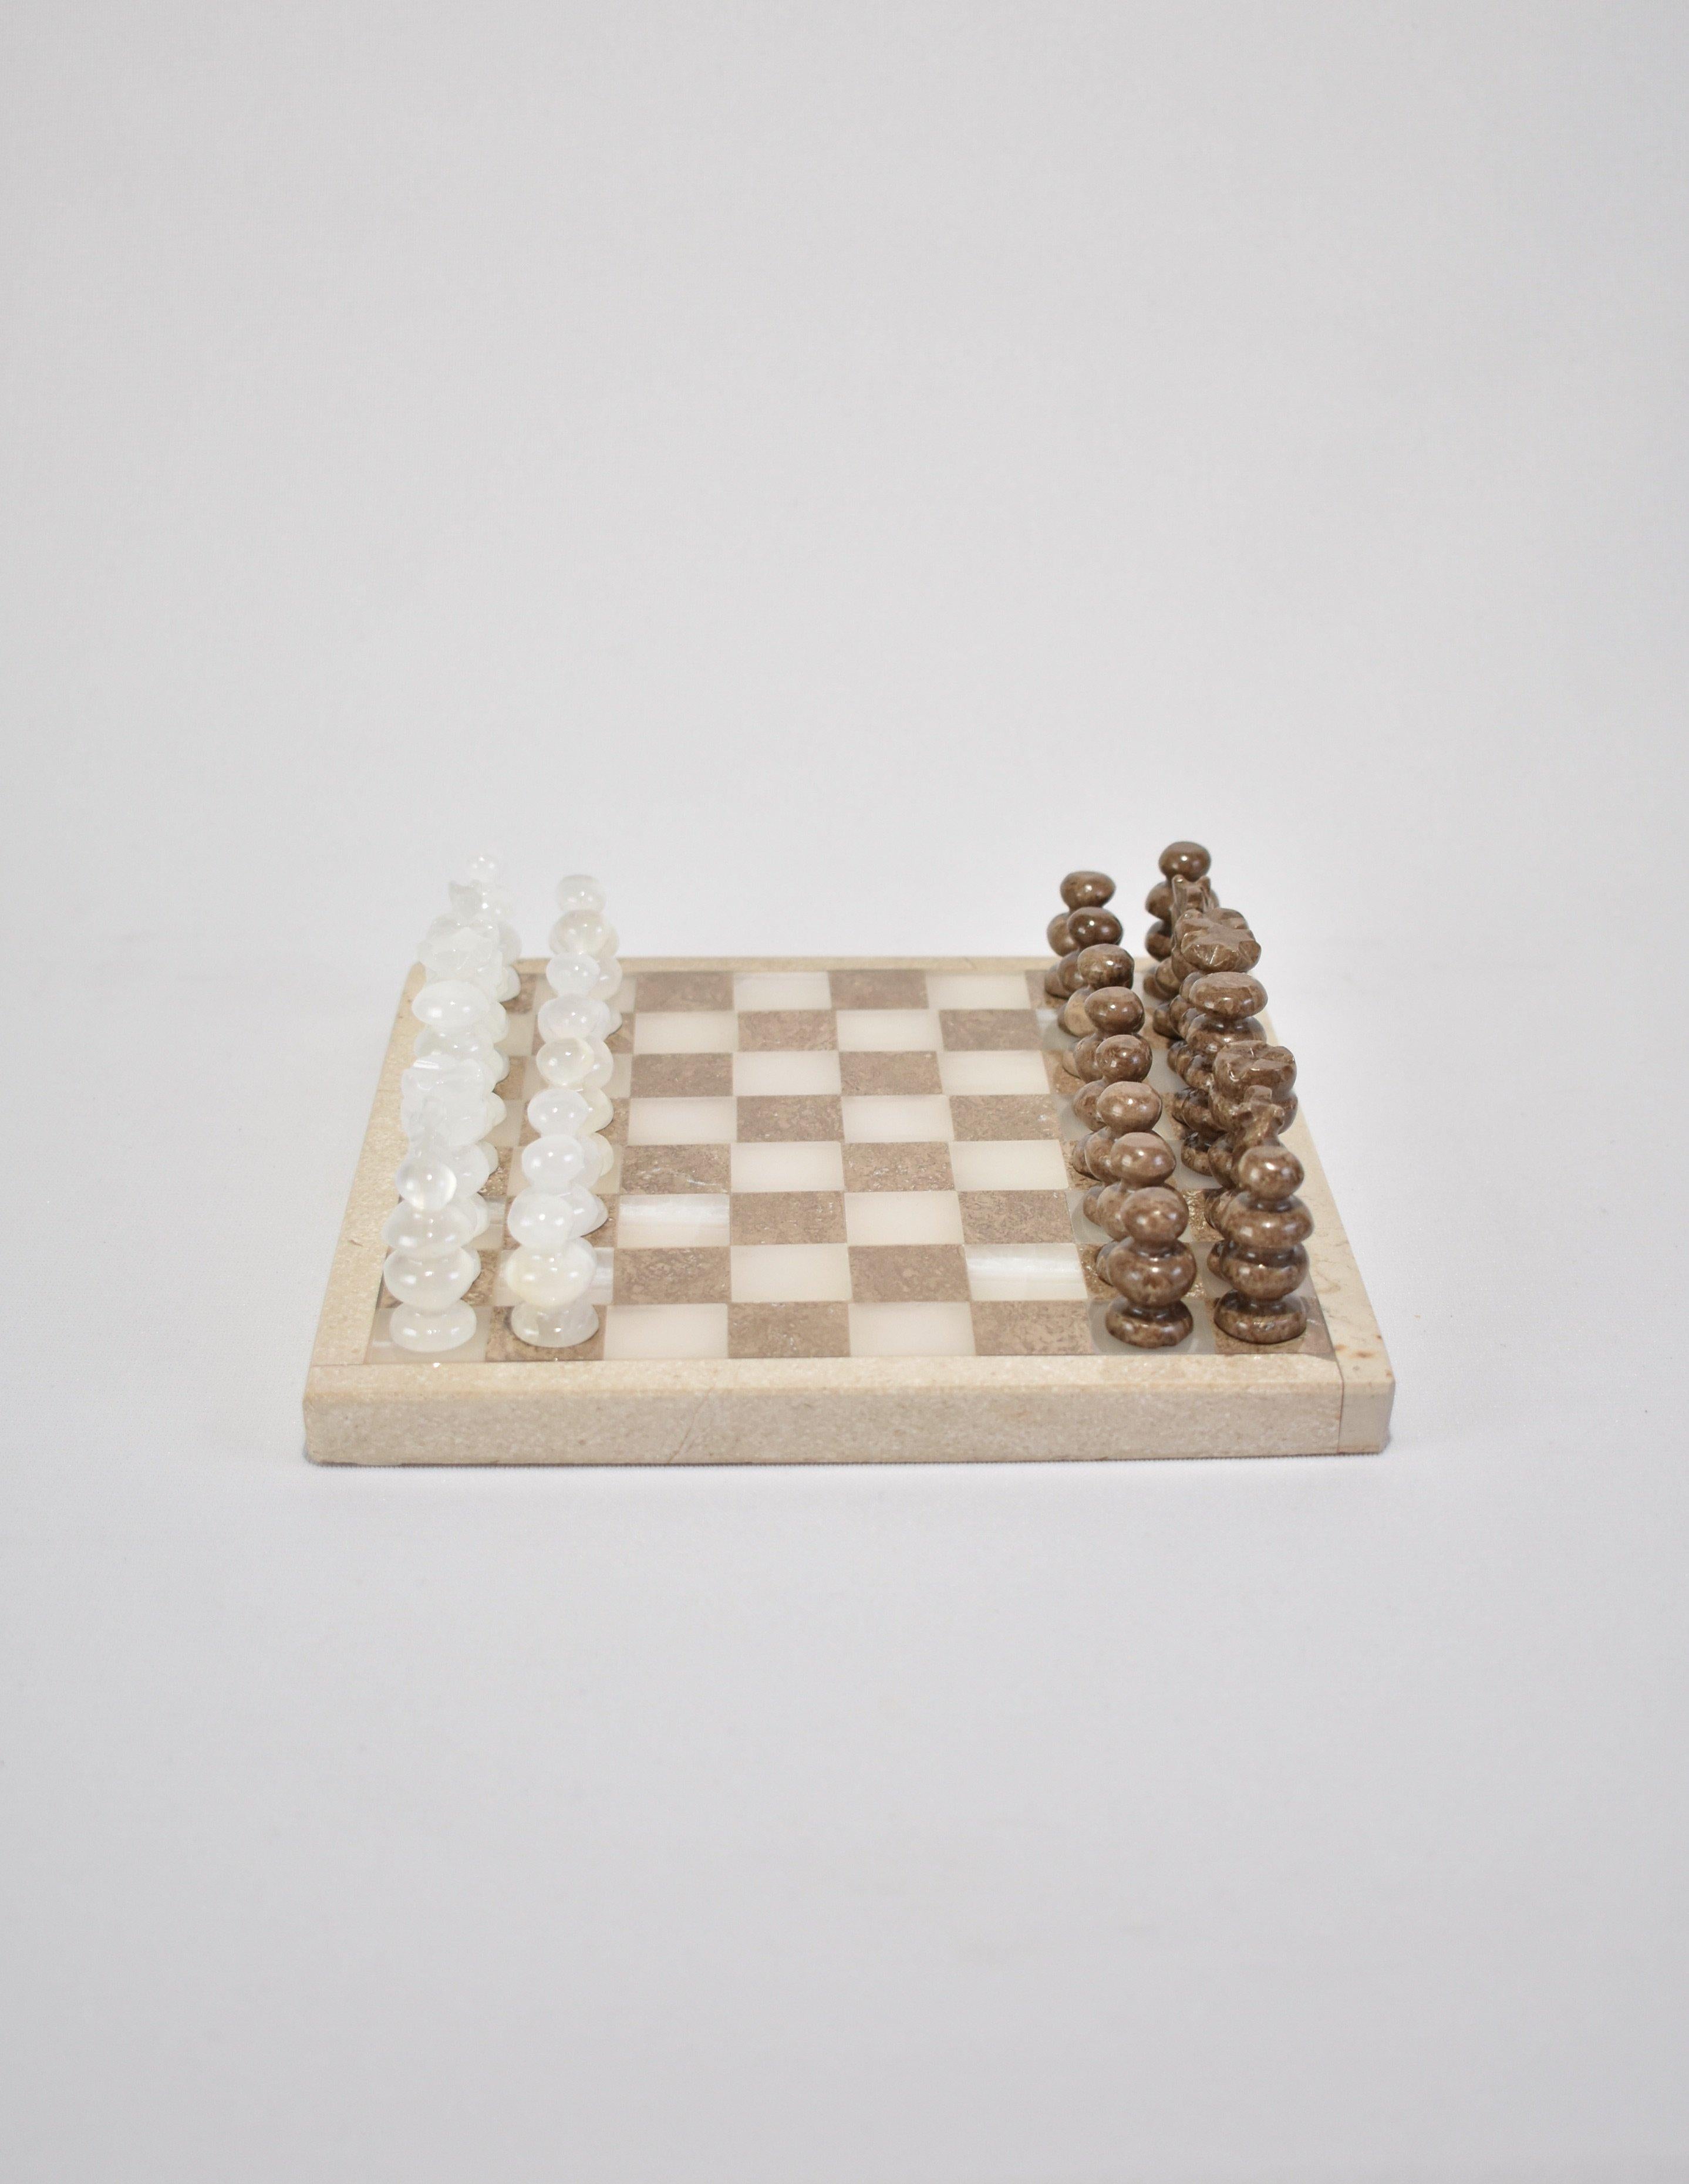 Beautiful, travel size marble and quartz chess board with hand carved pieces in brown marble and quartz. Includes 32 pieces.